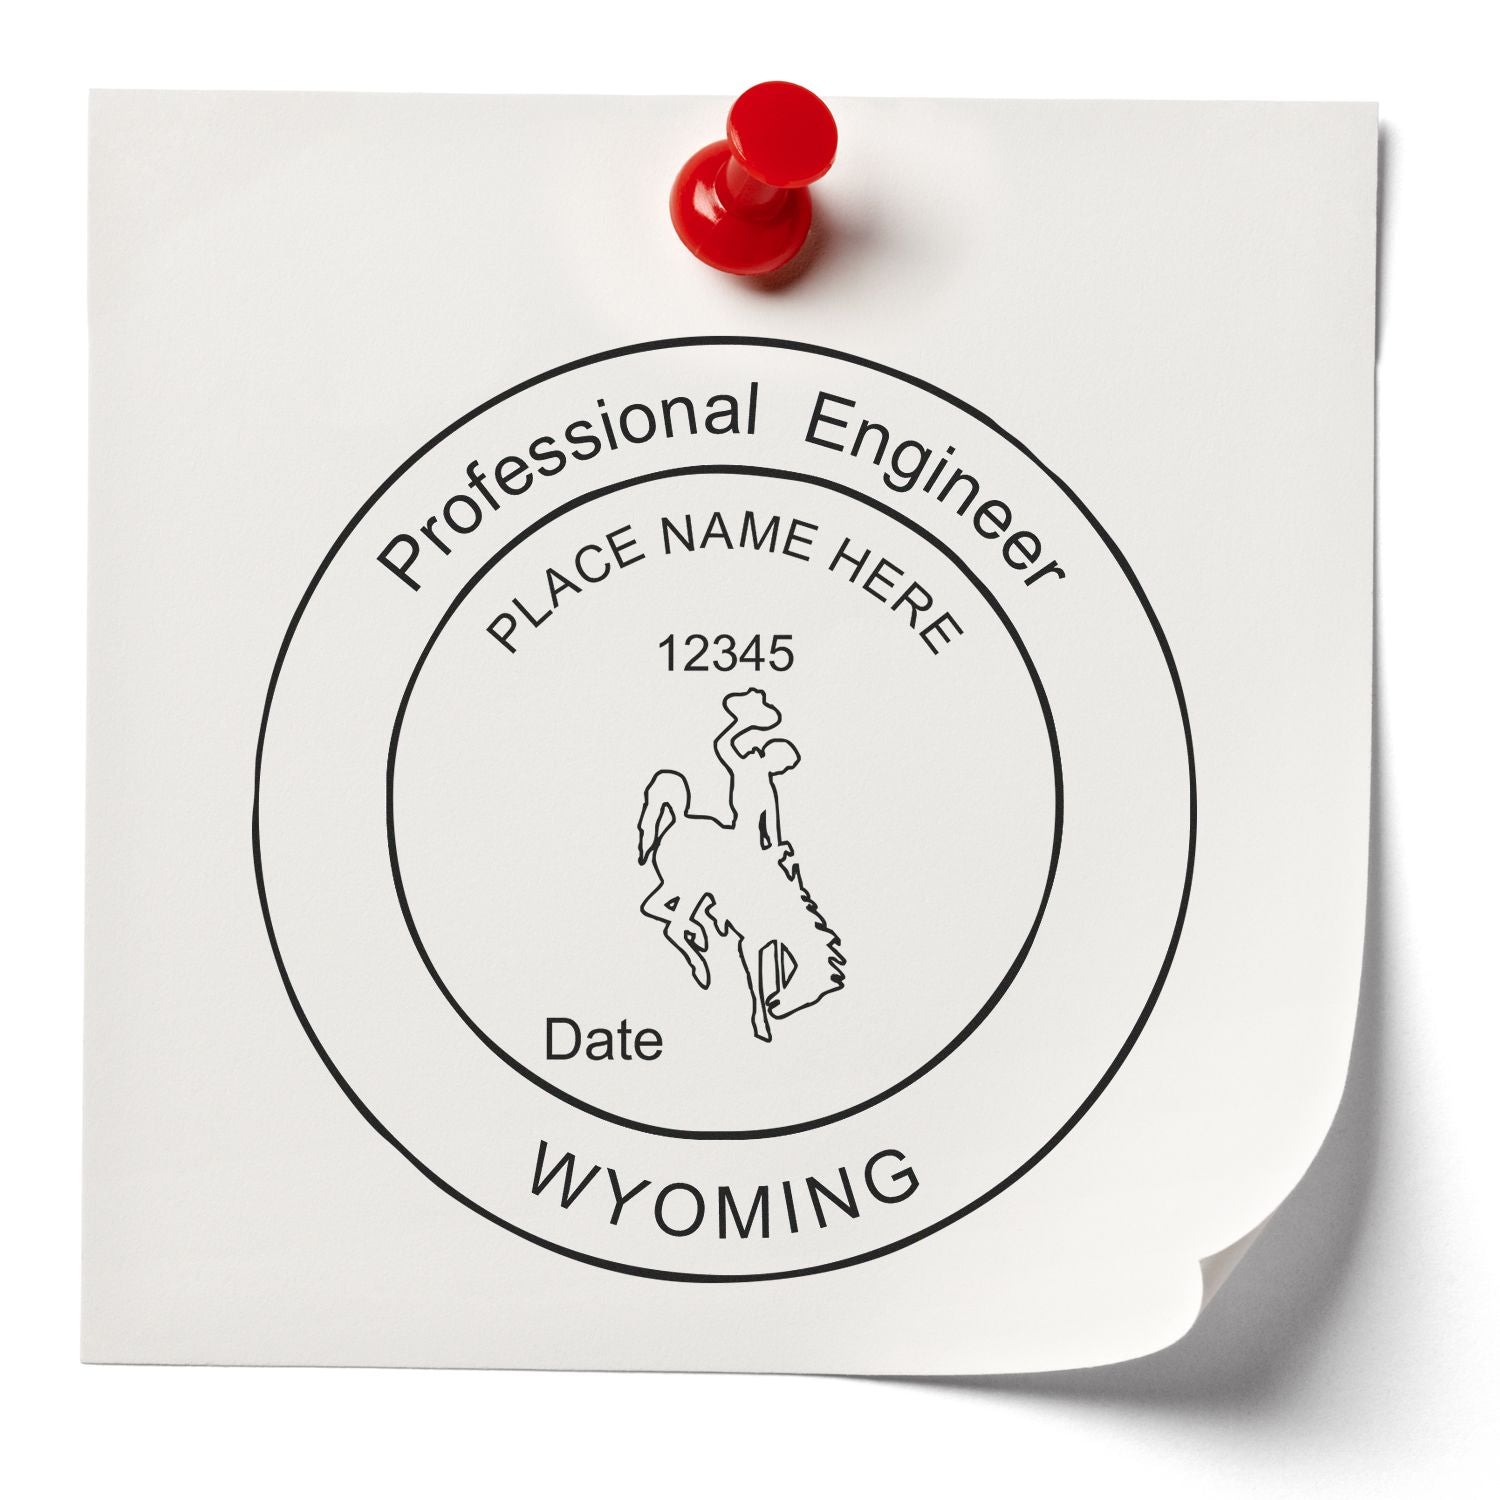 The main image for the Slim Pre-Inked Wyoming Professional Engineer Seal Stamp depicting a sample of the imprint and electronic files